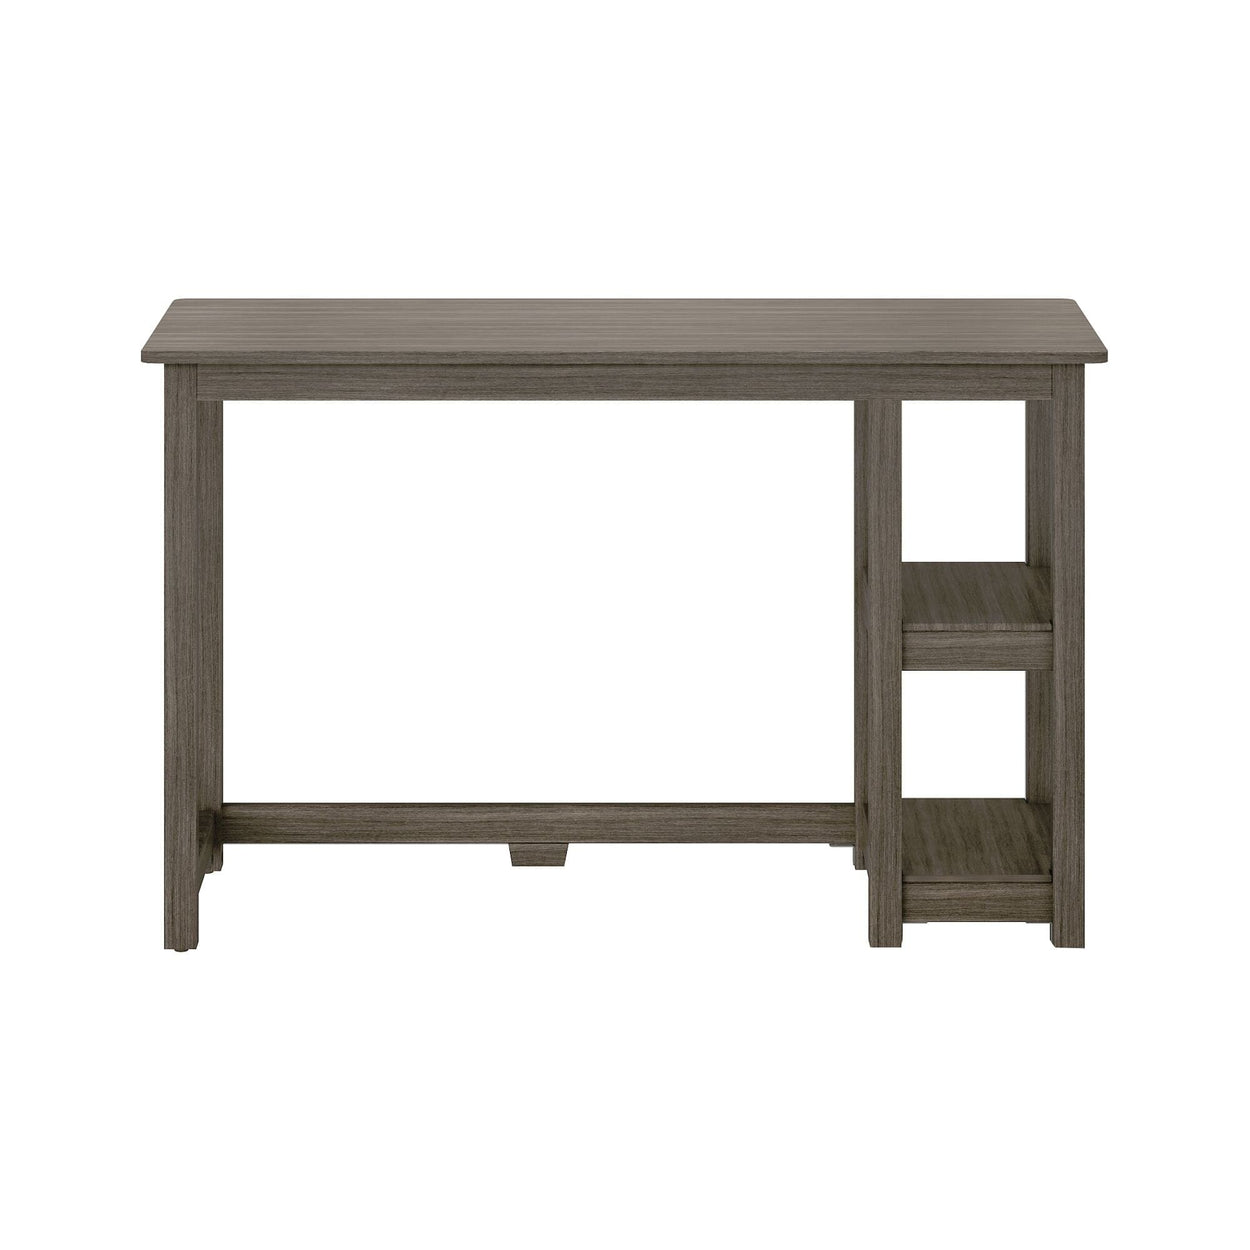 181205-151 : Furniture Desk with Bookshelves - 47 inches, Clay